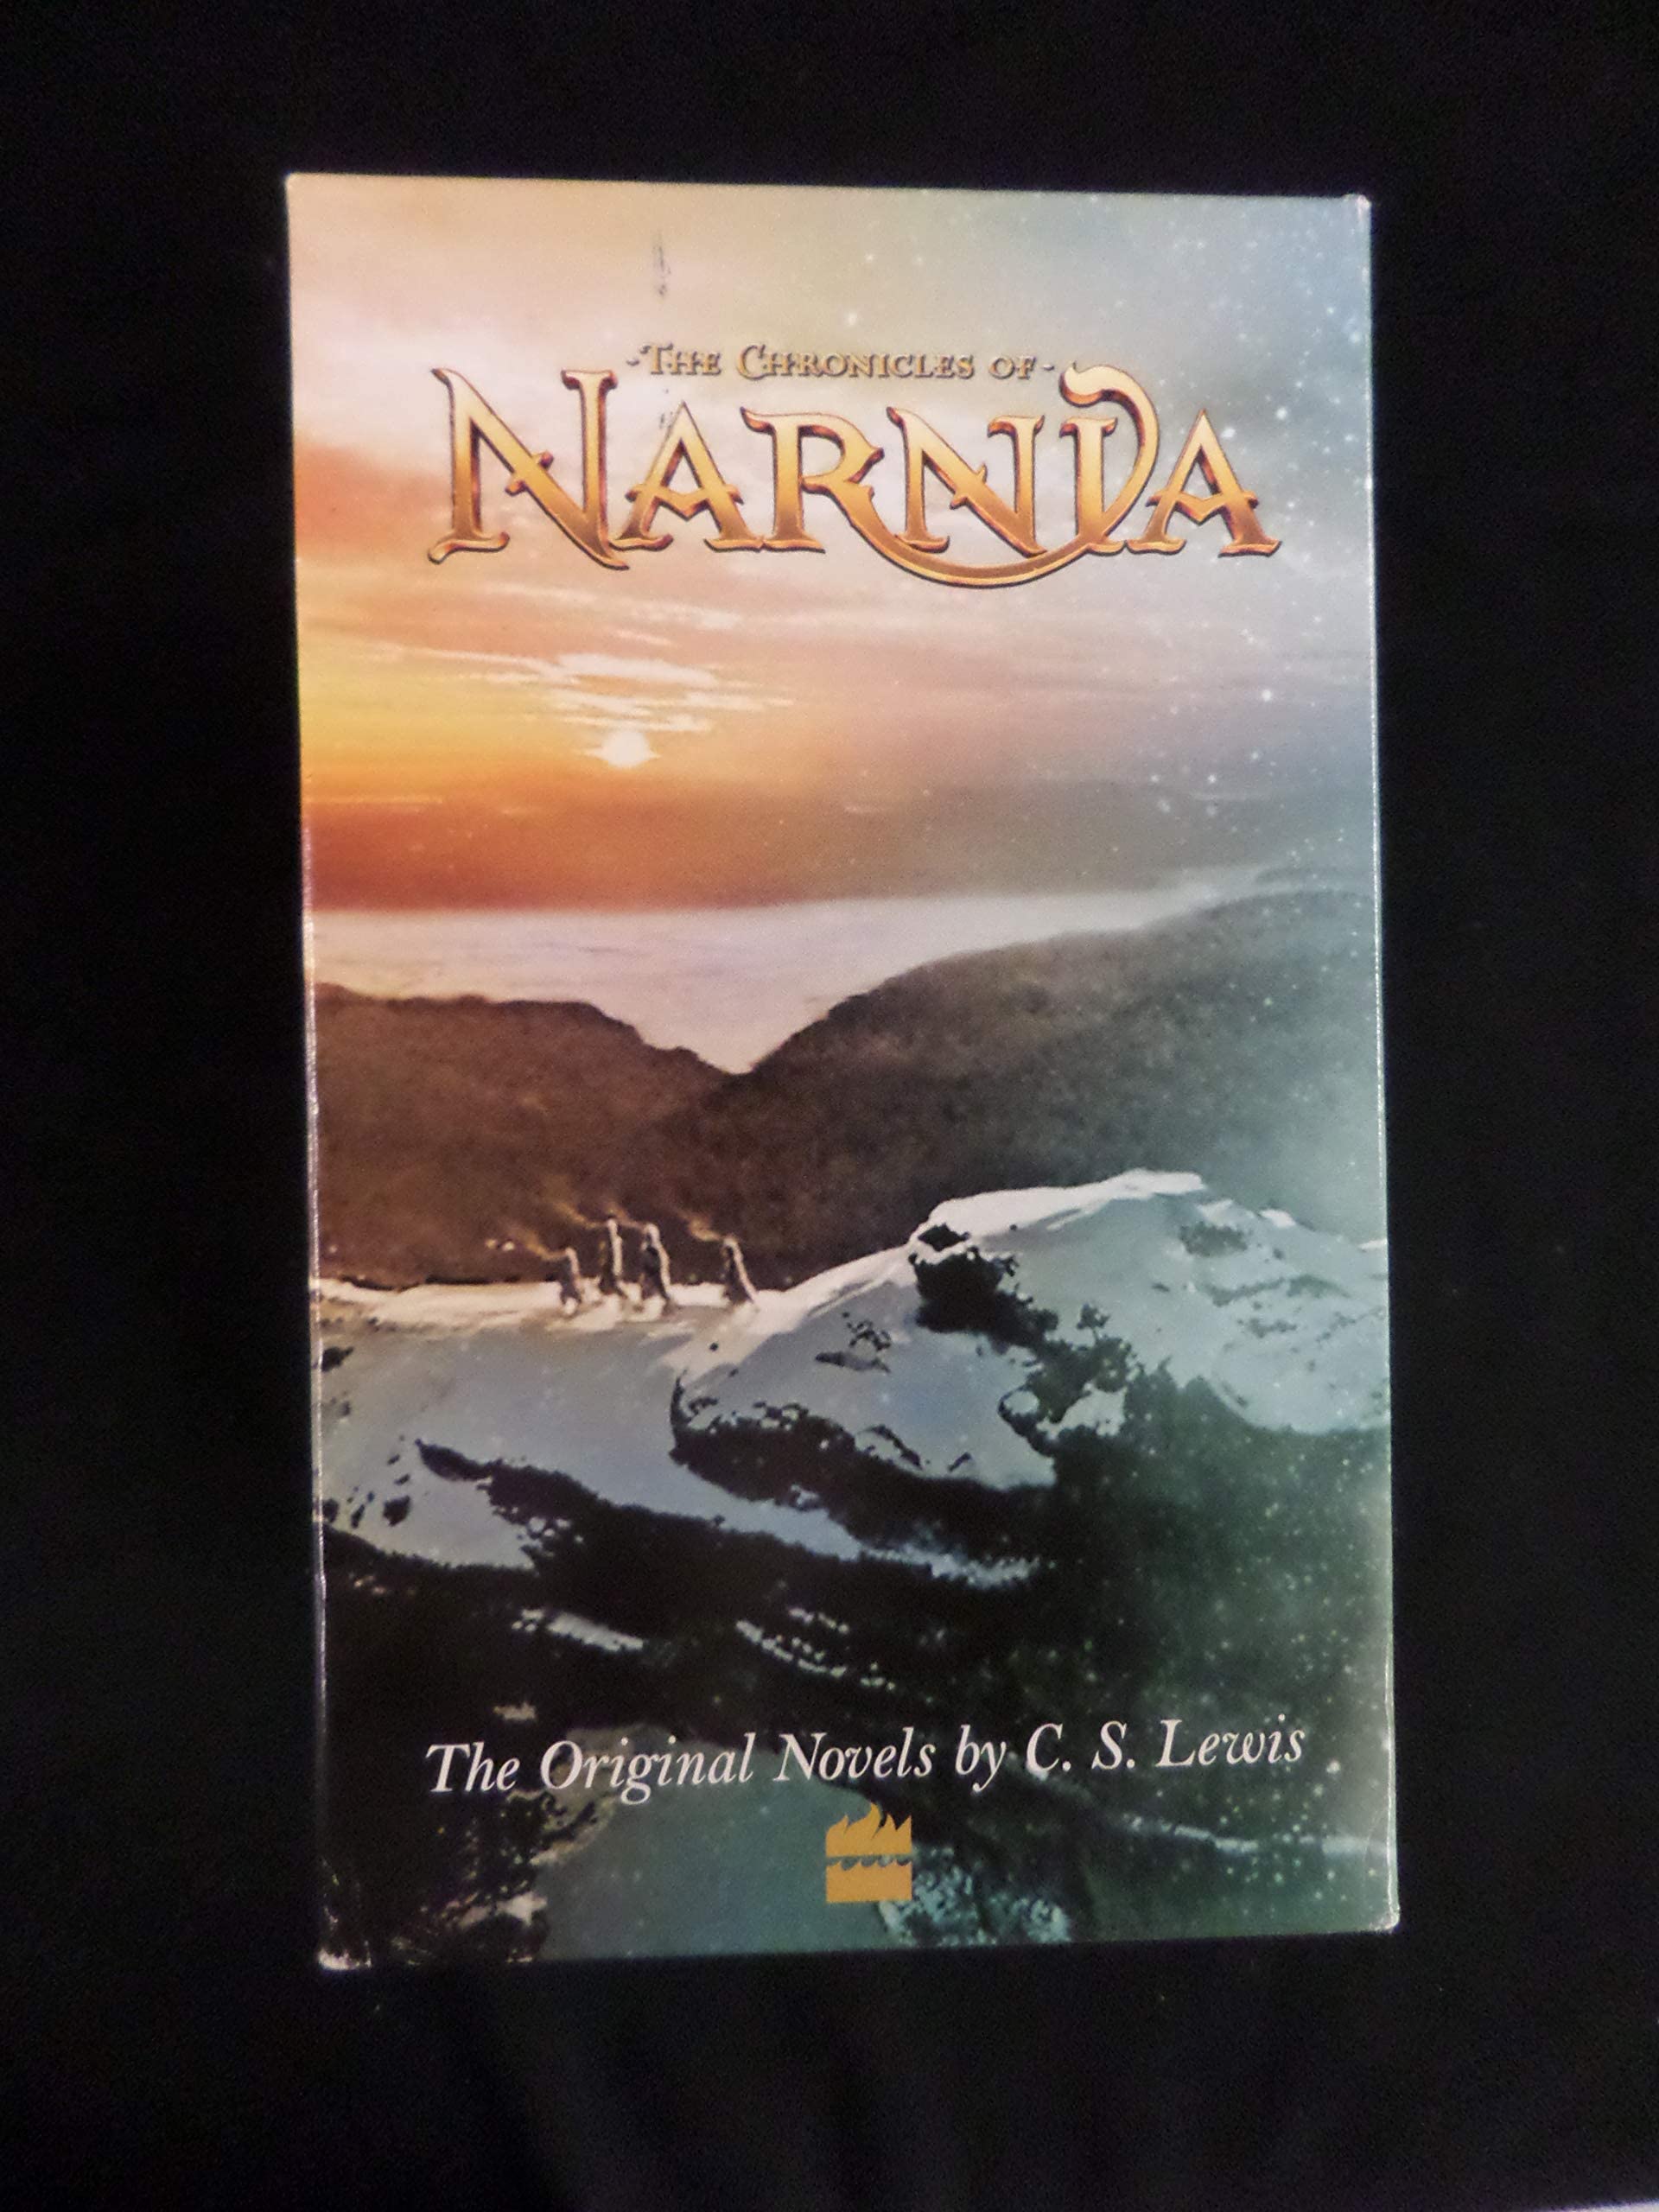 The Chronicles of Narnia (Box Set)